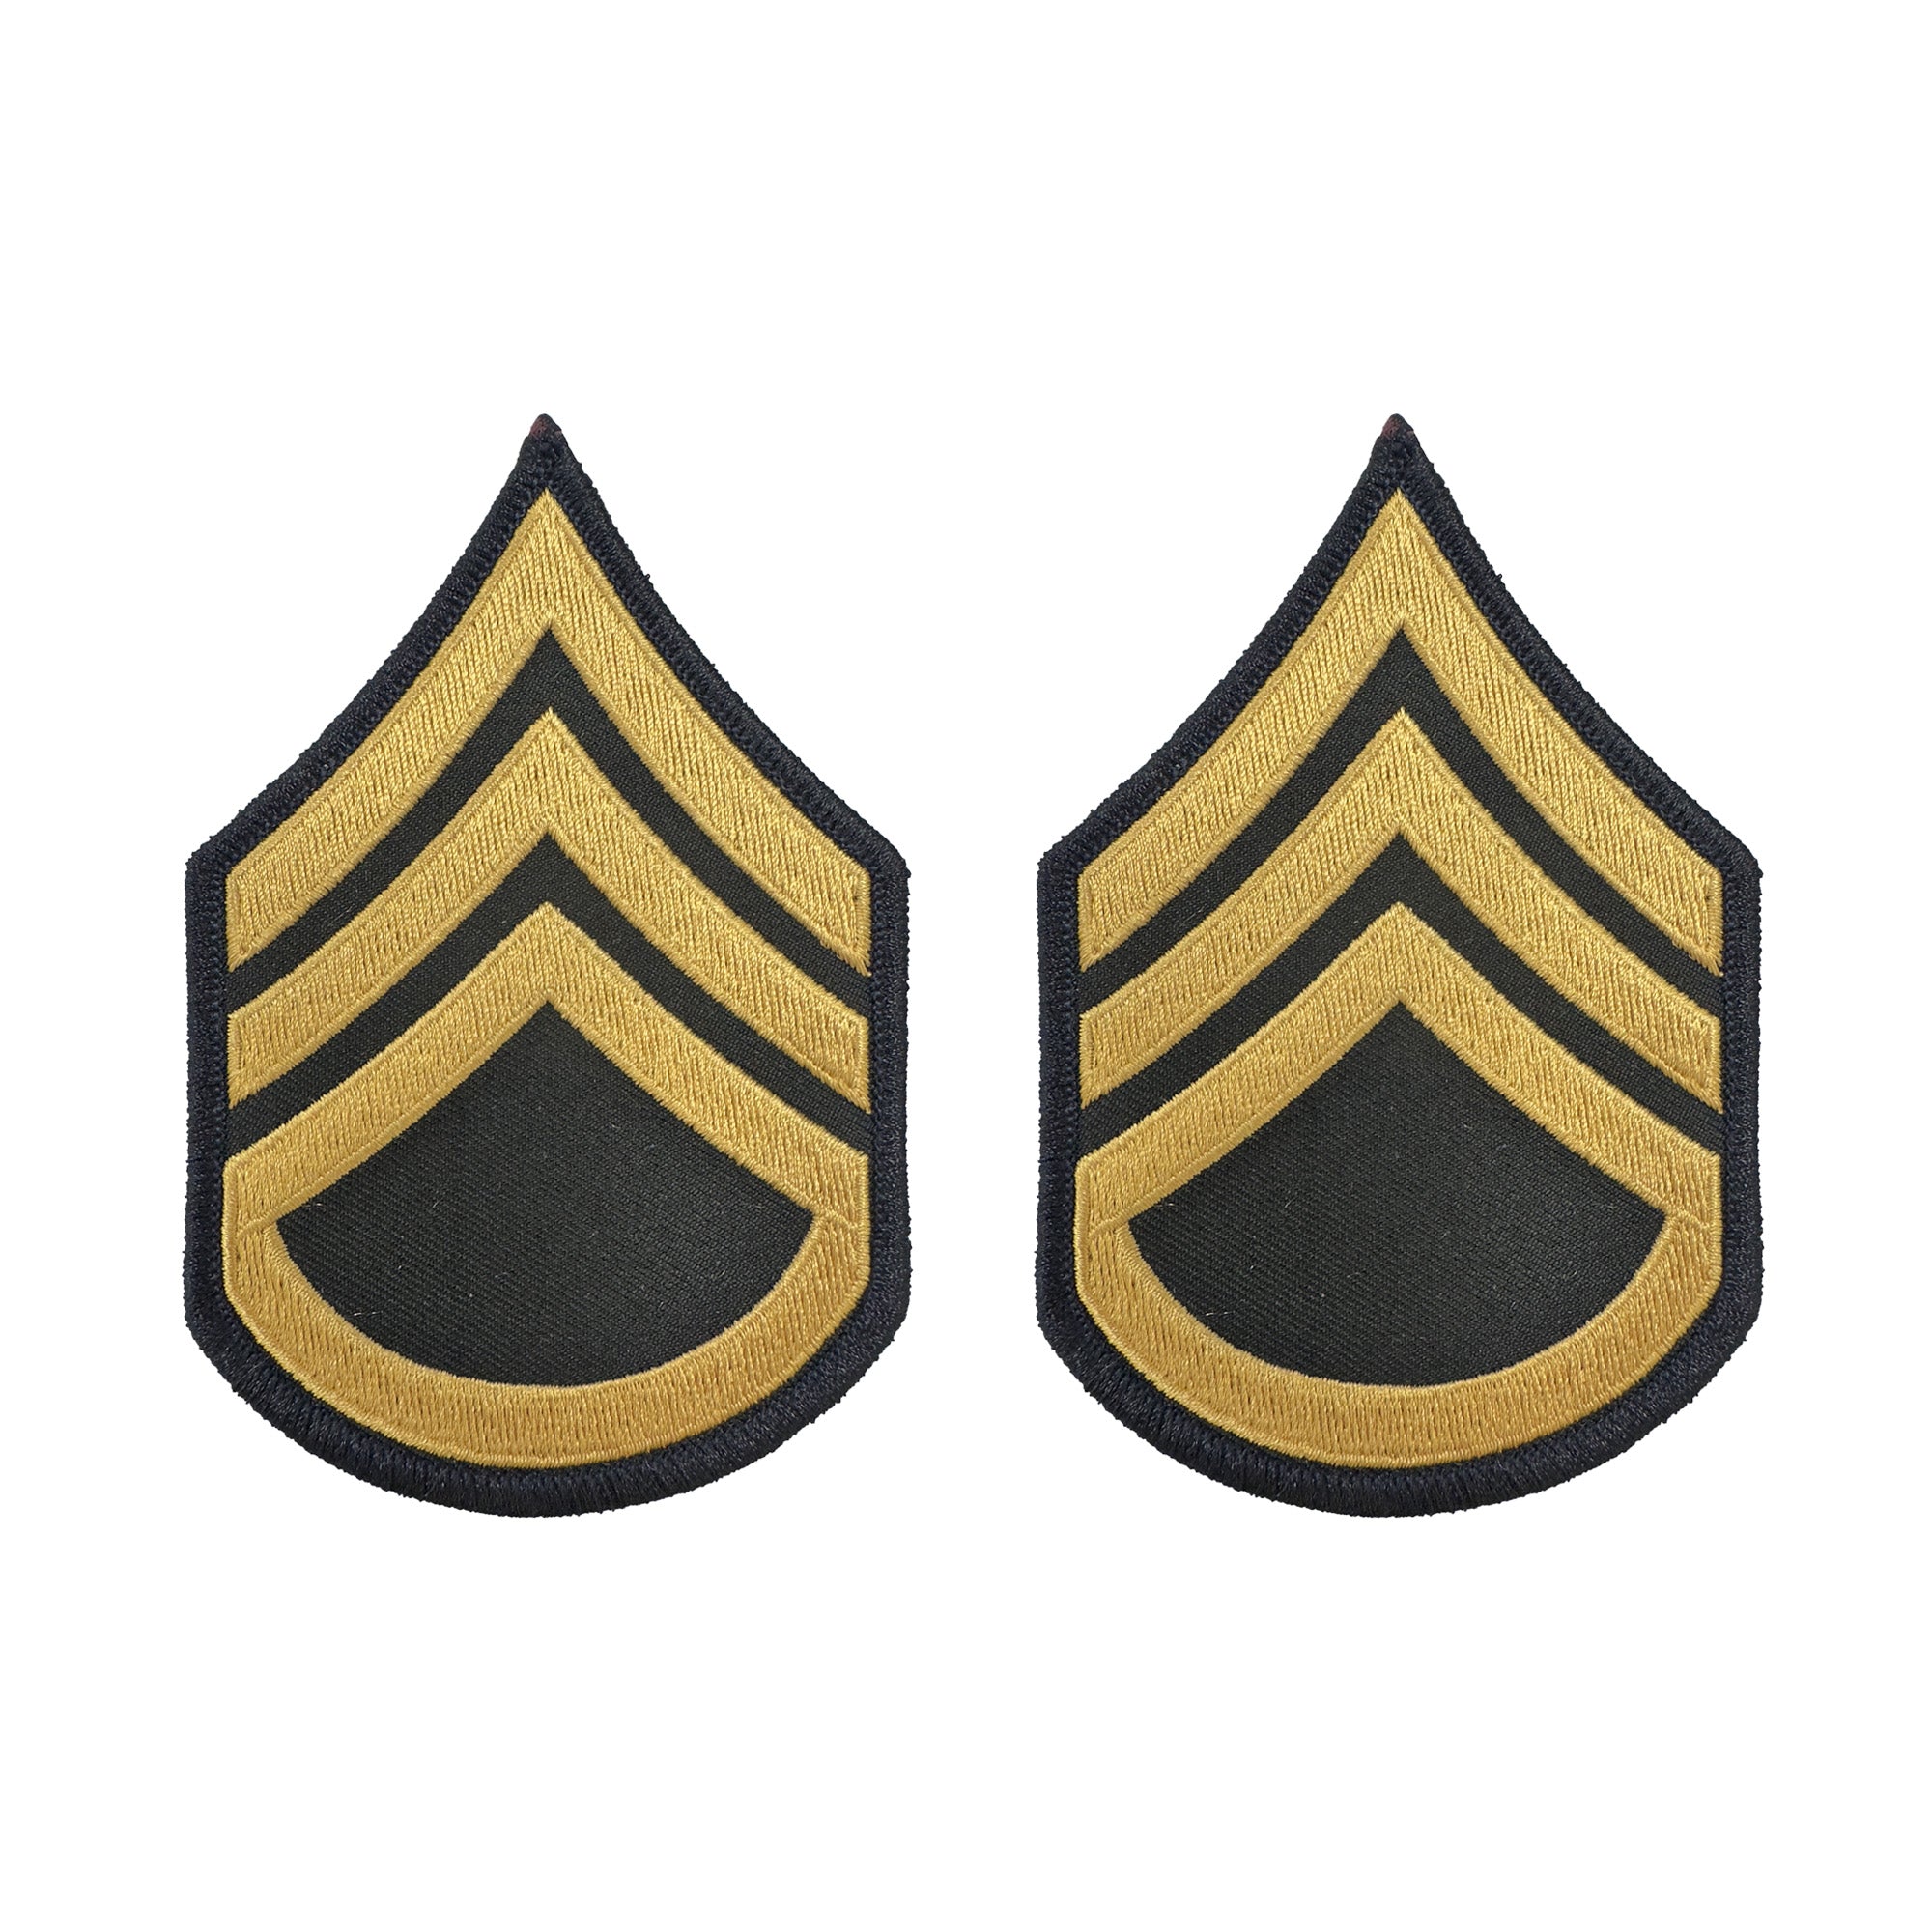 E6 Staff Sergeant Gold on Blue Sew-on - Large-Male